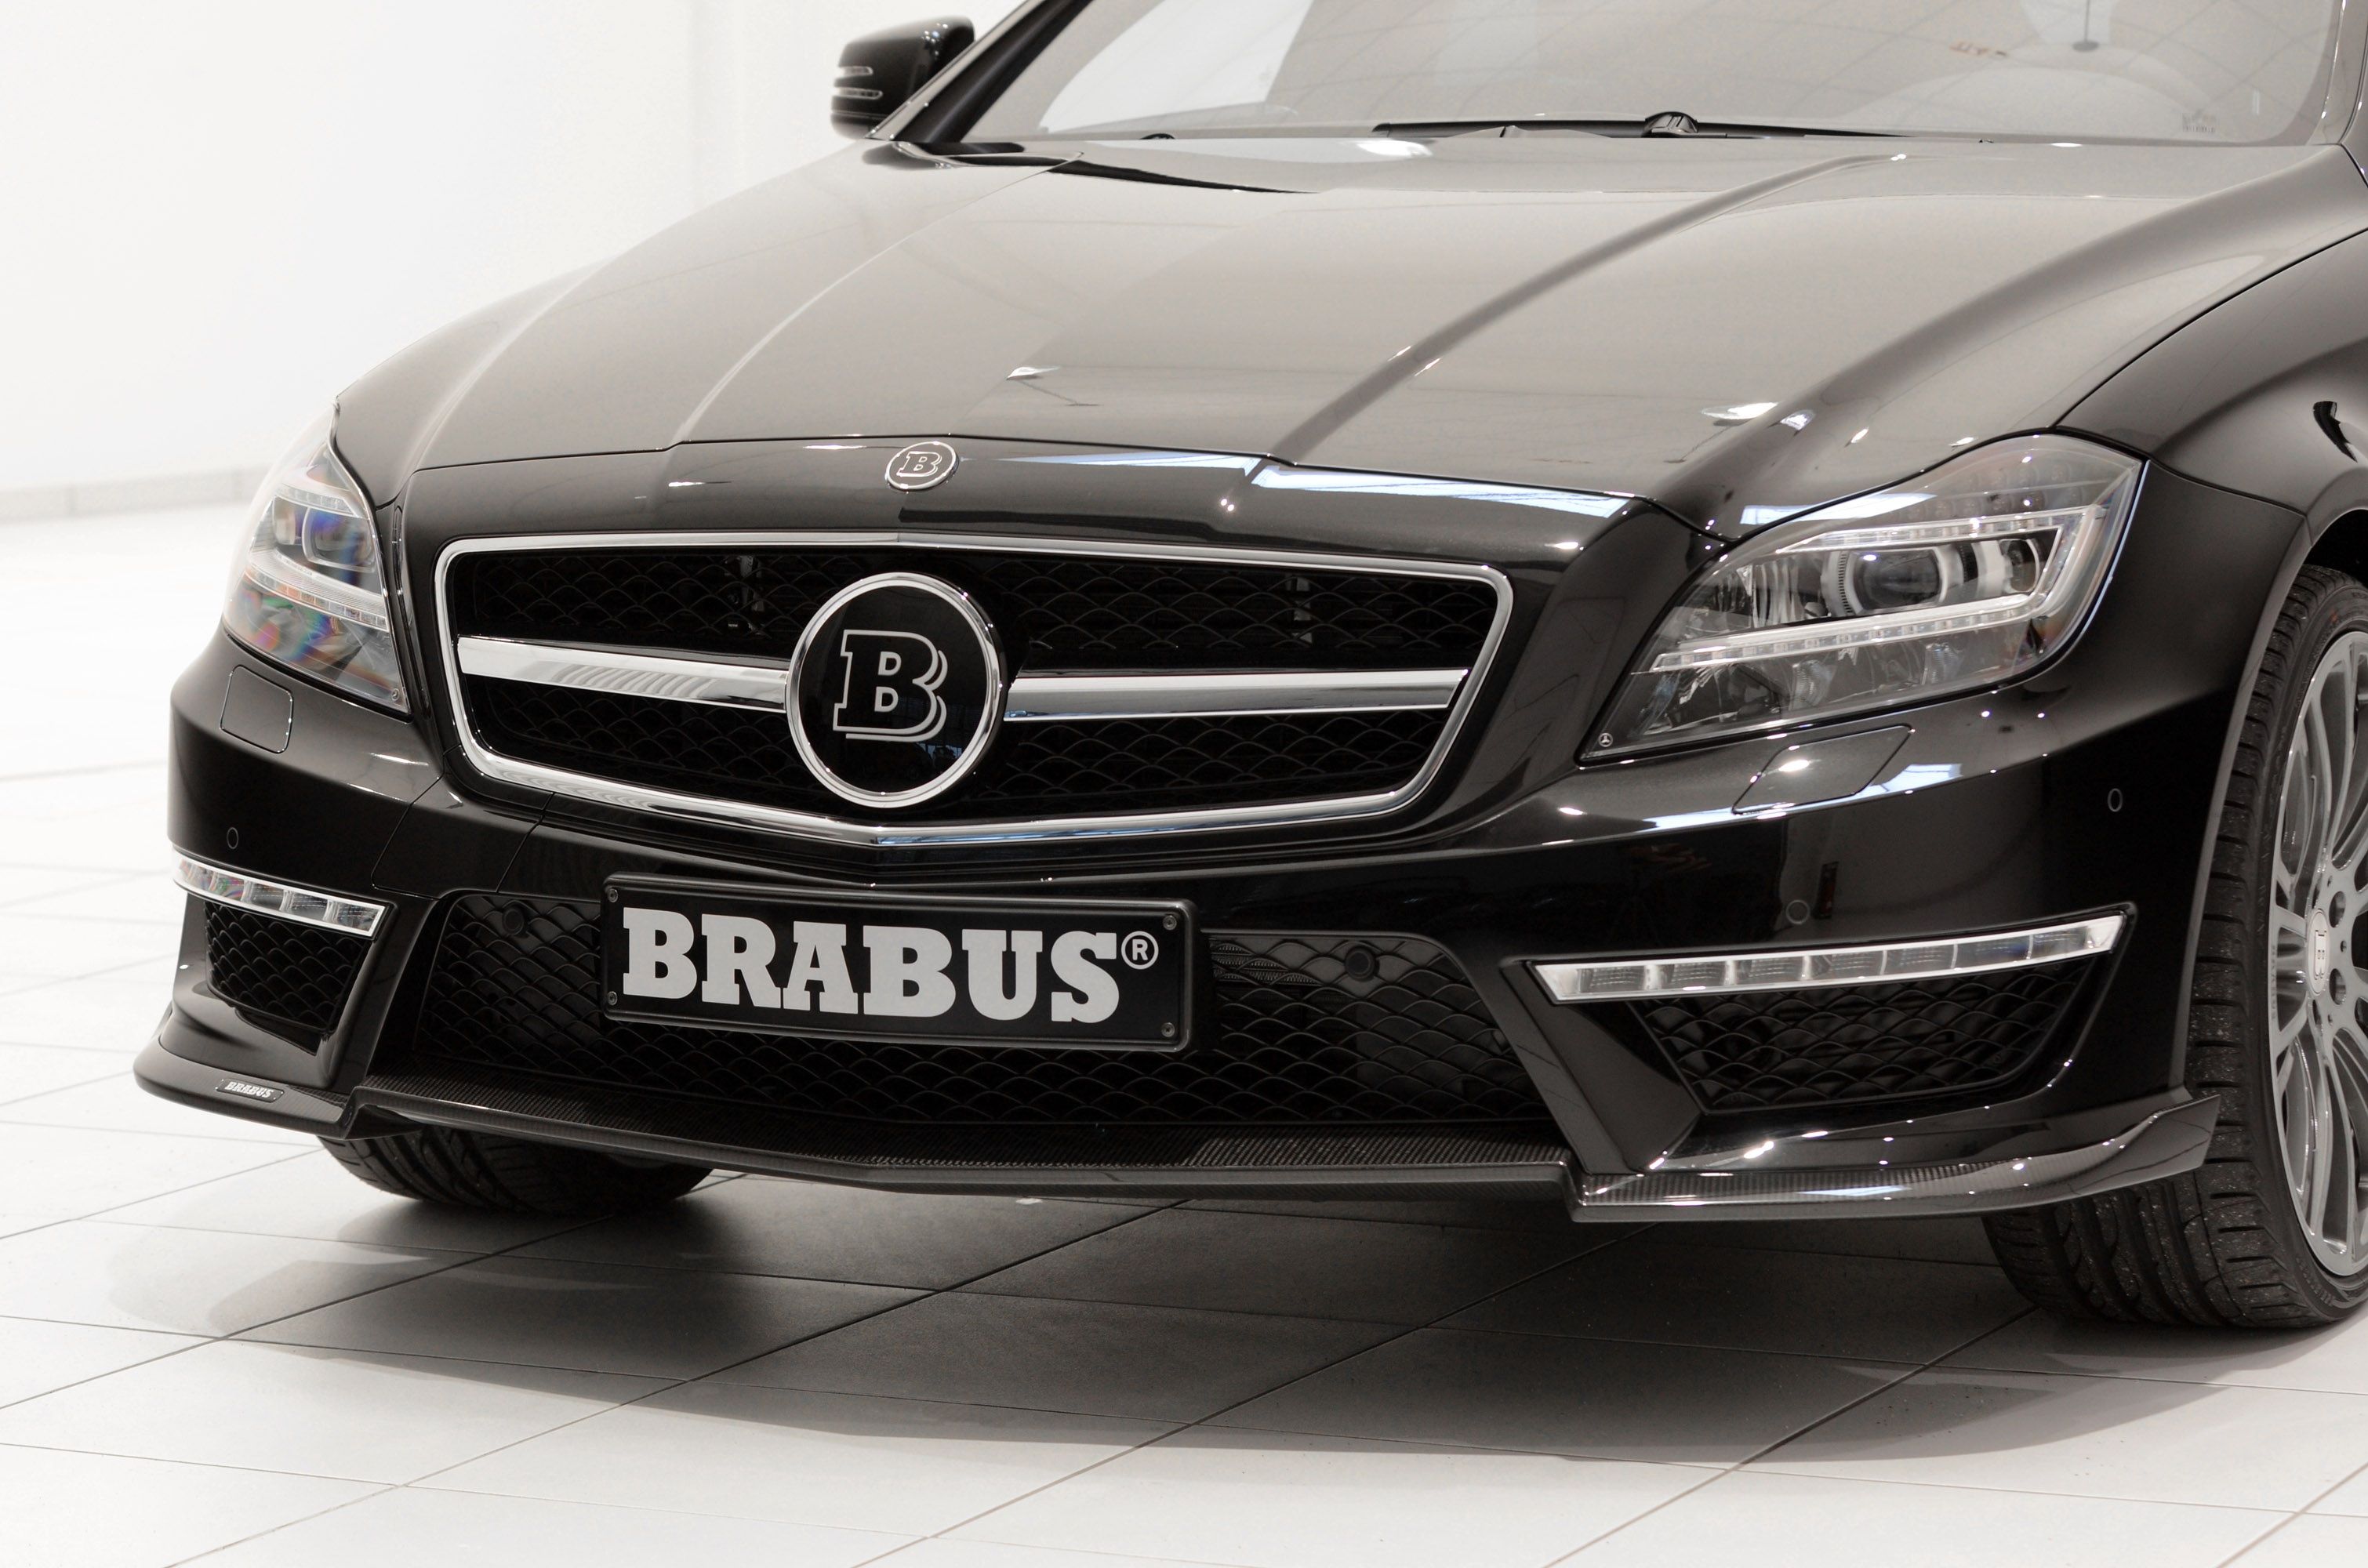 2013 Mercedes CLS63 AMG B63S-730 by Brabus